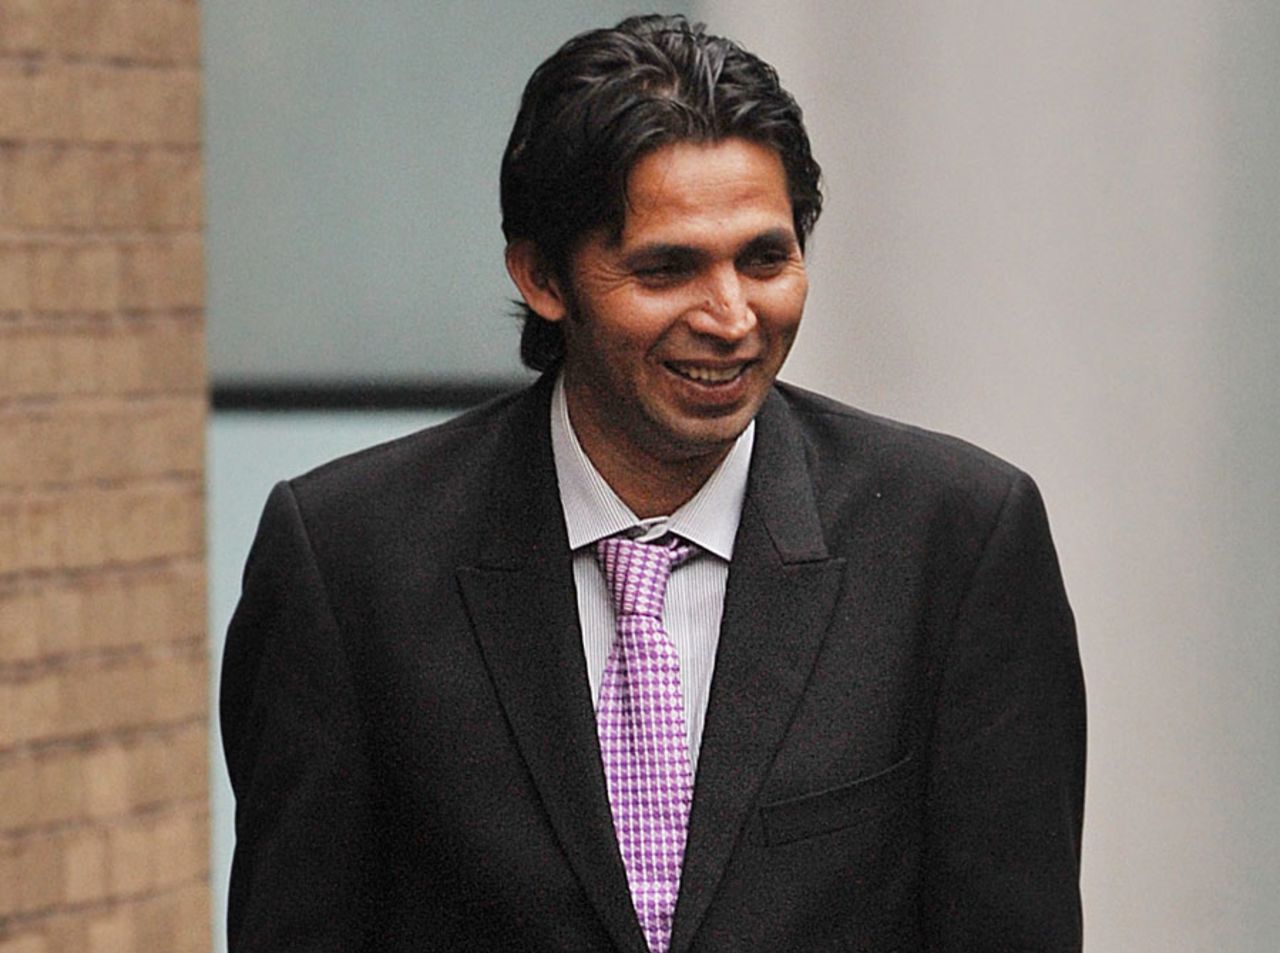 Mohammad Asif outside the Southwark Crown Court, London, October 27, 2011